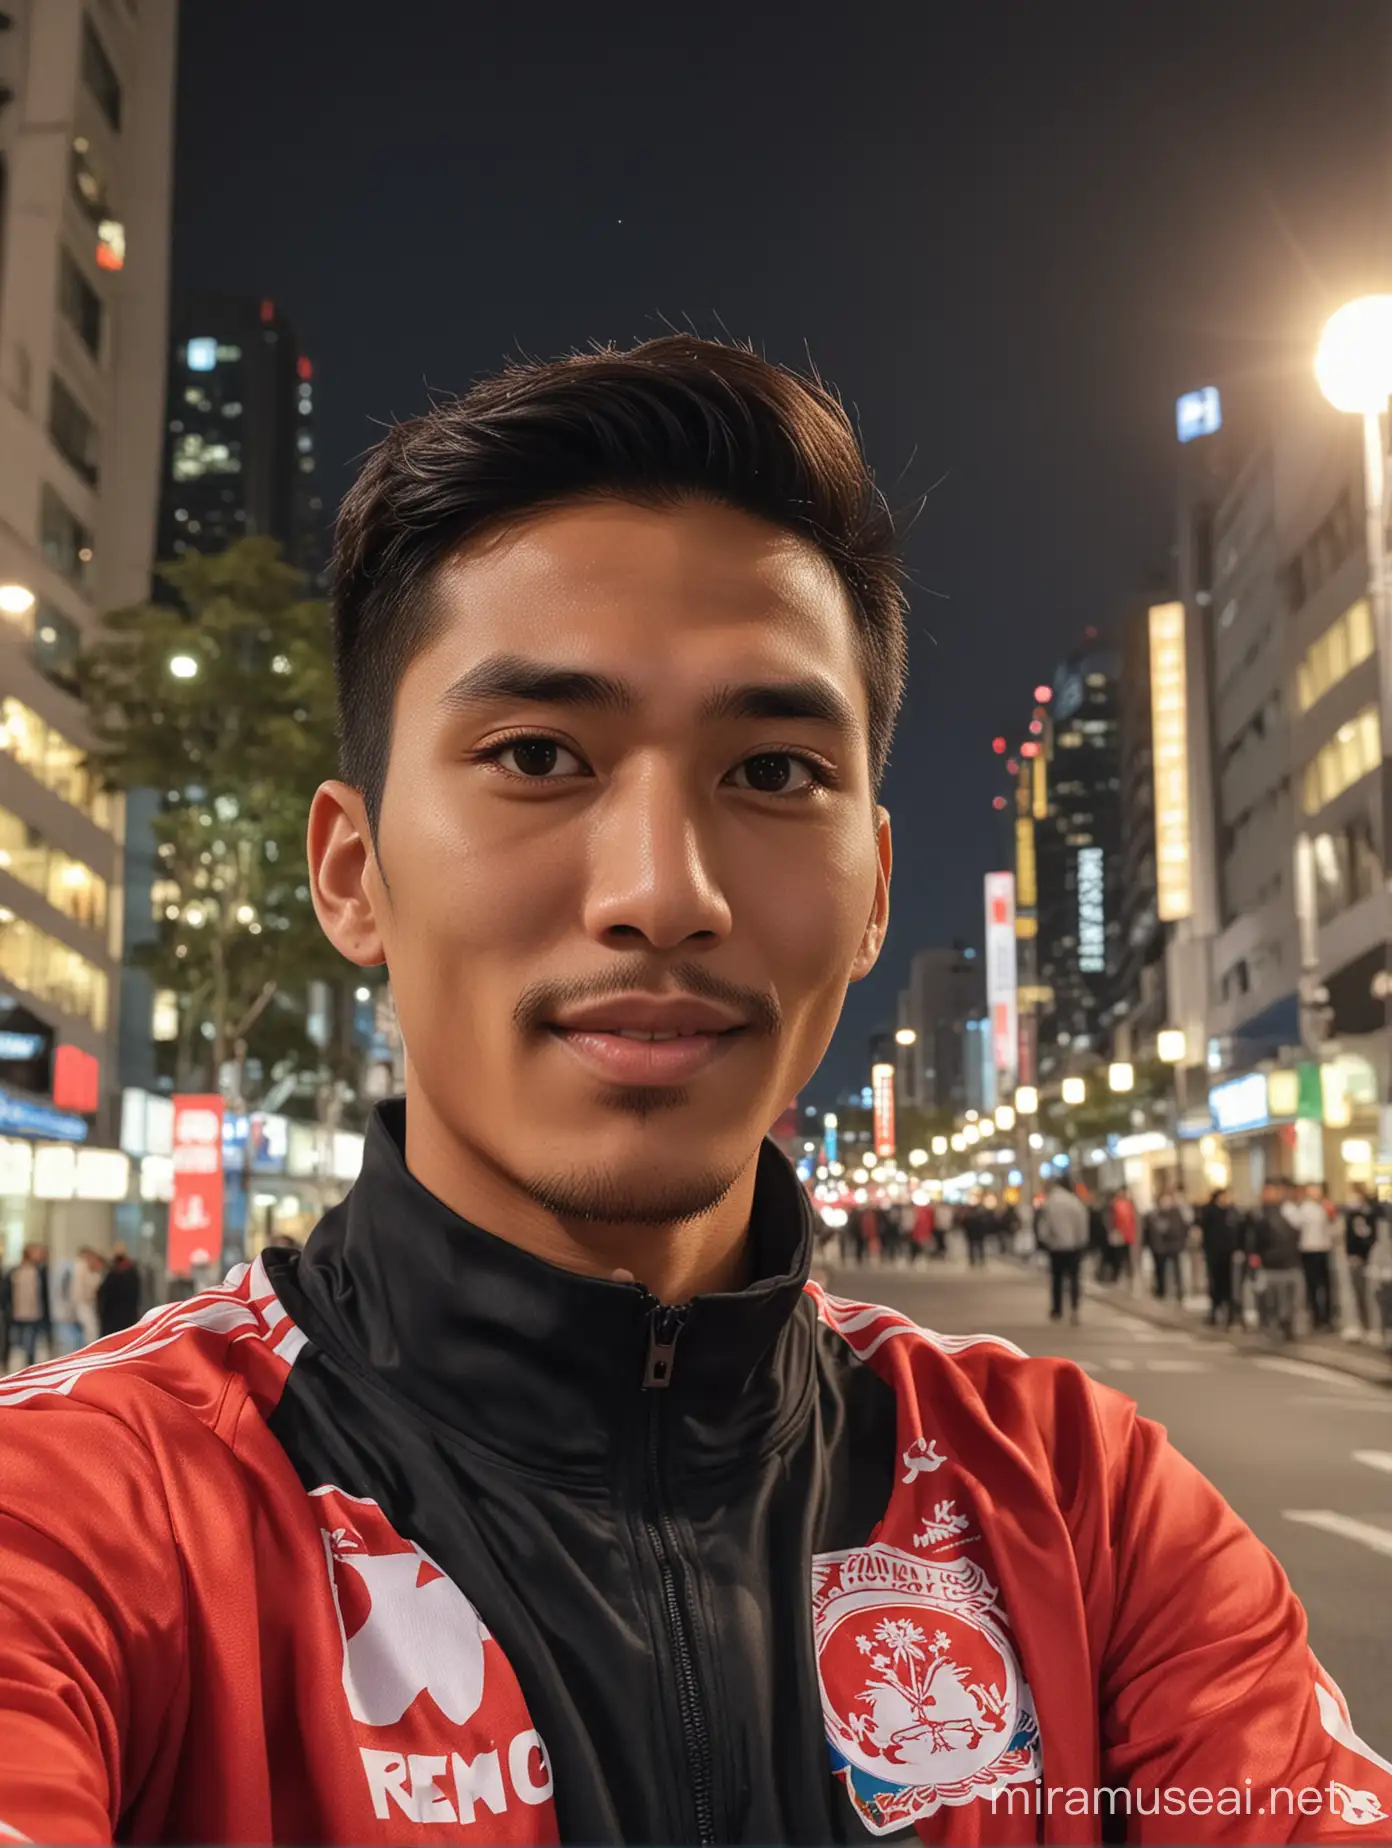 Young Indonesian Man in National Team Jersey Taking Selfie with Older Man in Tokyo City Night